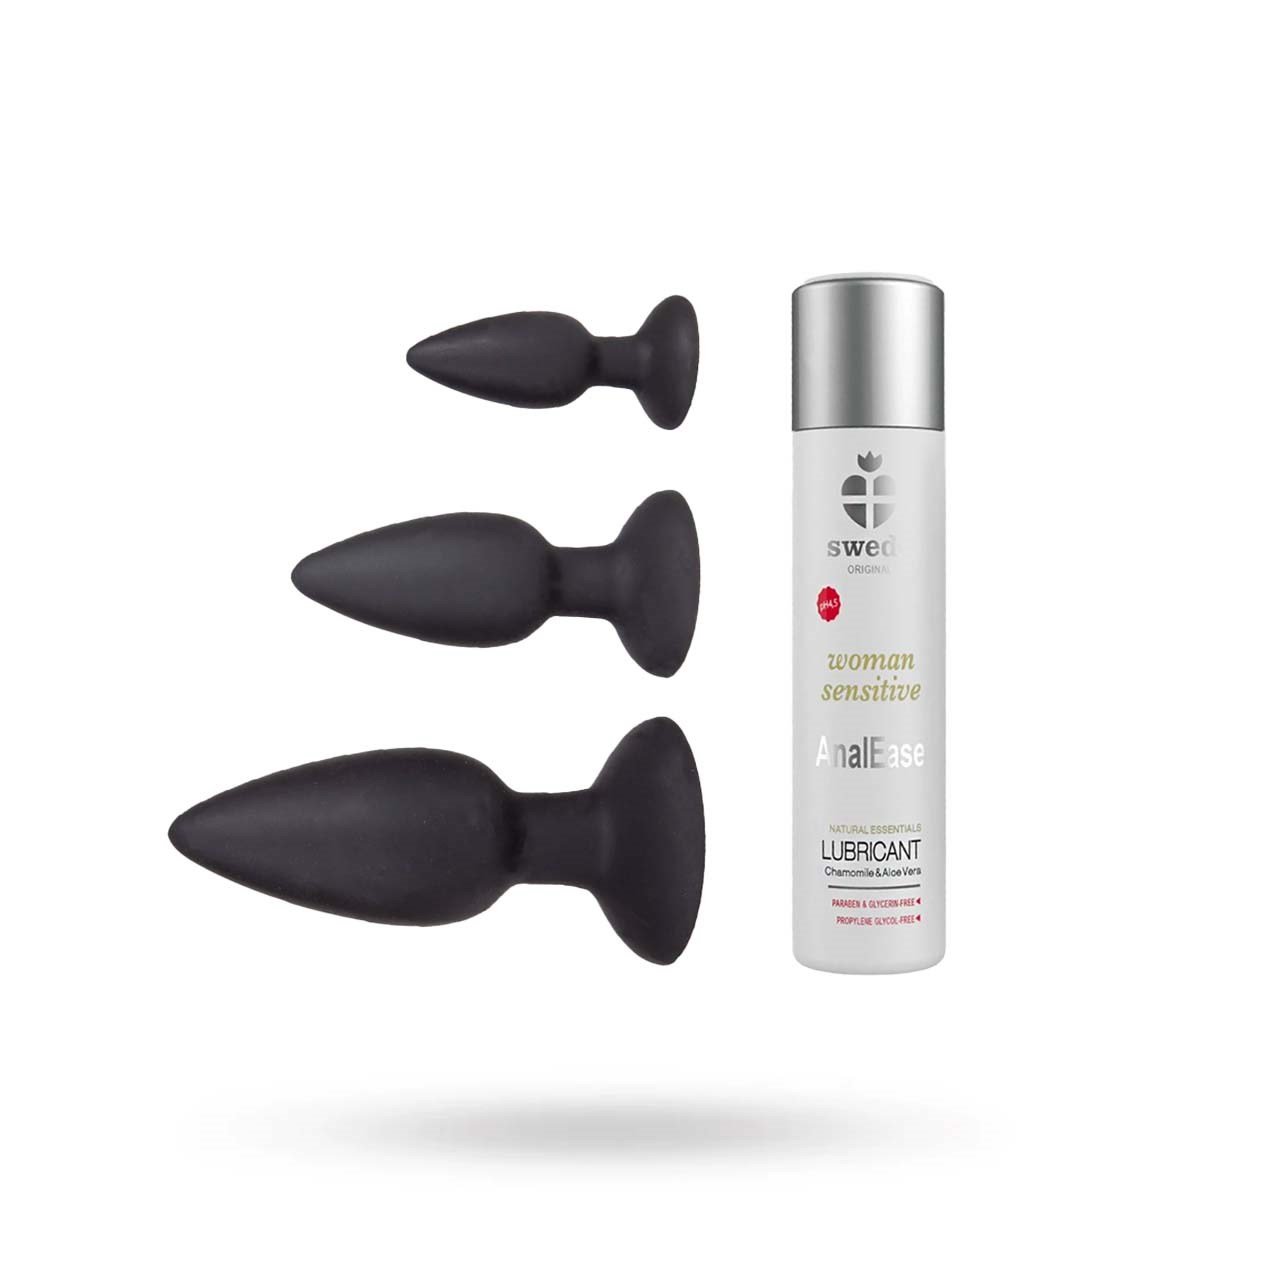 Sustainable Pleasure Silicone Buttplug Trainer Kit
& Swede Sensitive Analease Glidmedel 120 Ml